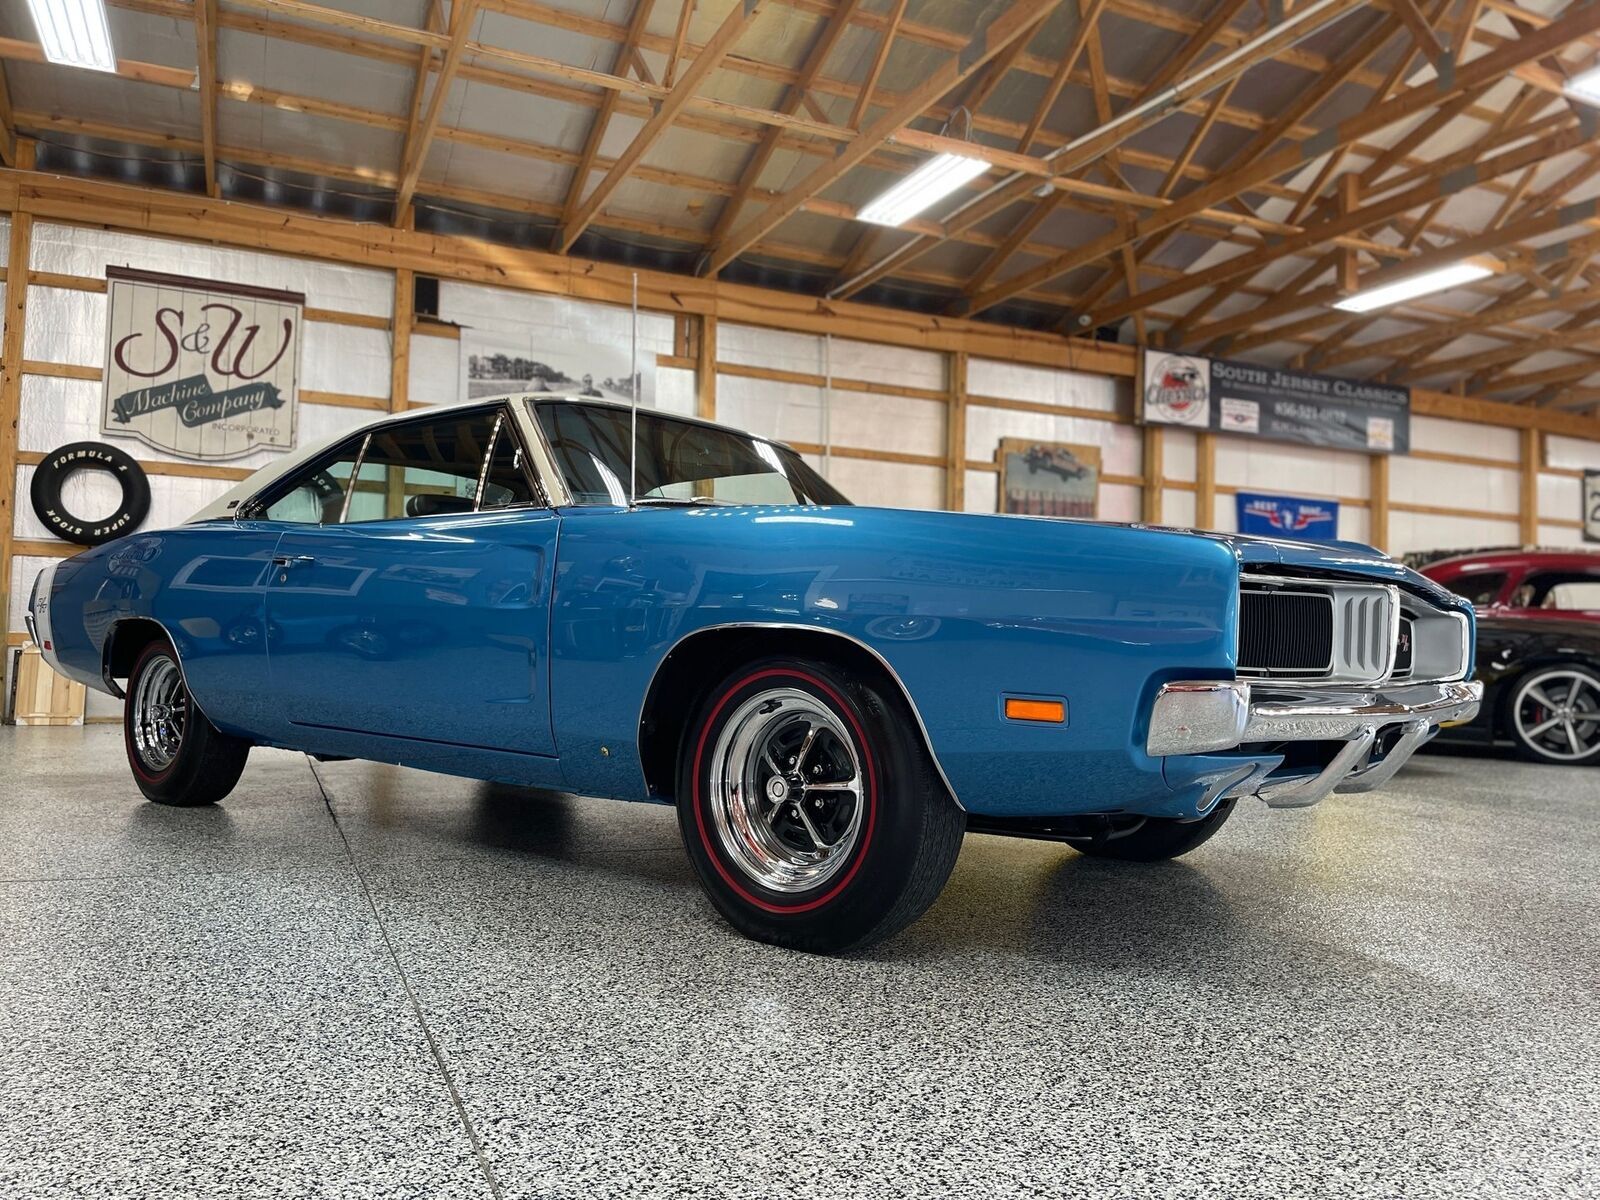 1969 Dodge Charger R/T Special Edition #'s Matching 440 B5 Blue Rotisserie Resto